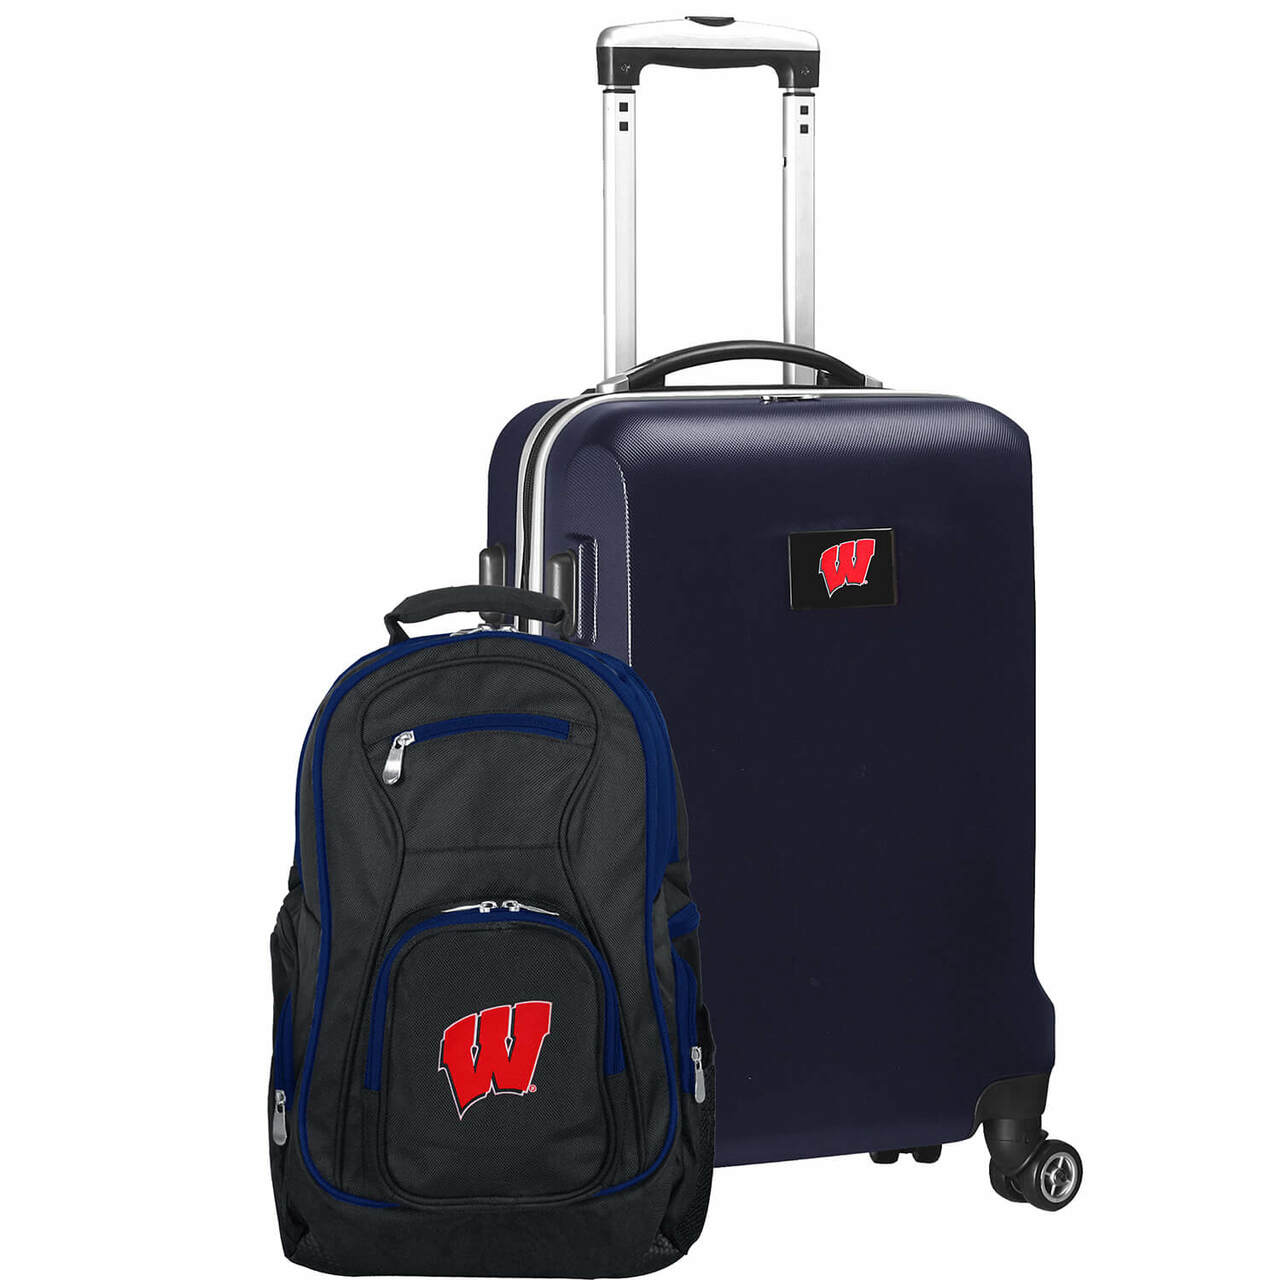 Wisconsin Badgers Deluxe 2-Piece Backpack and Carry on Set in Navy